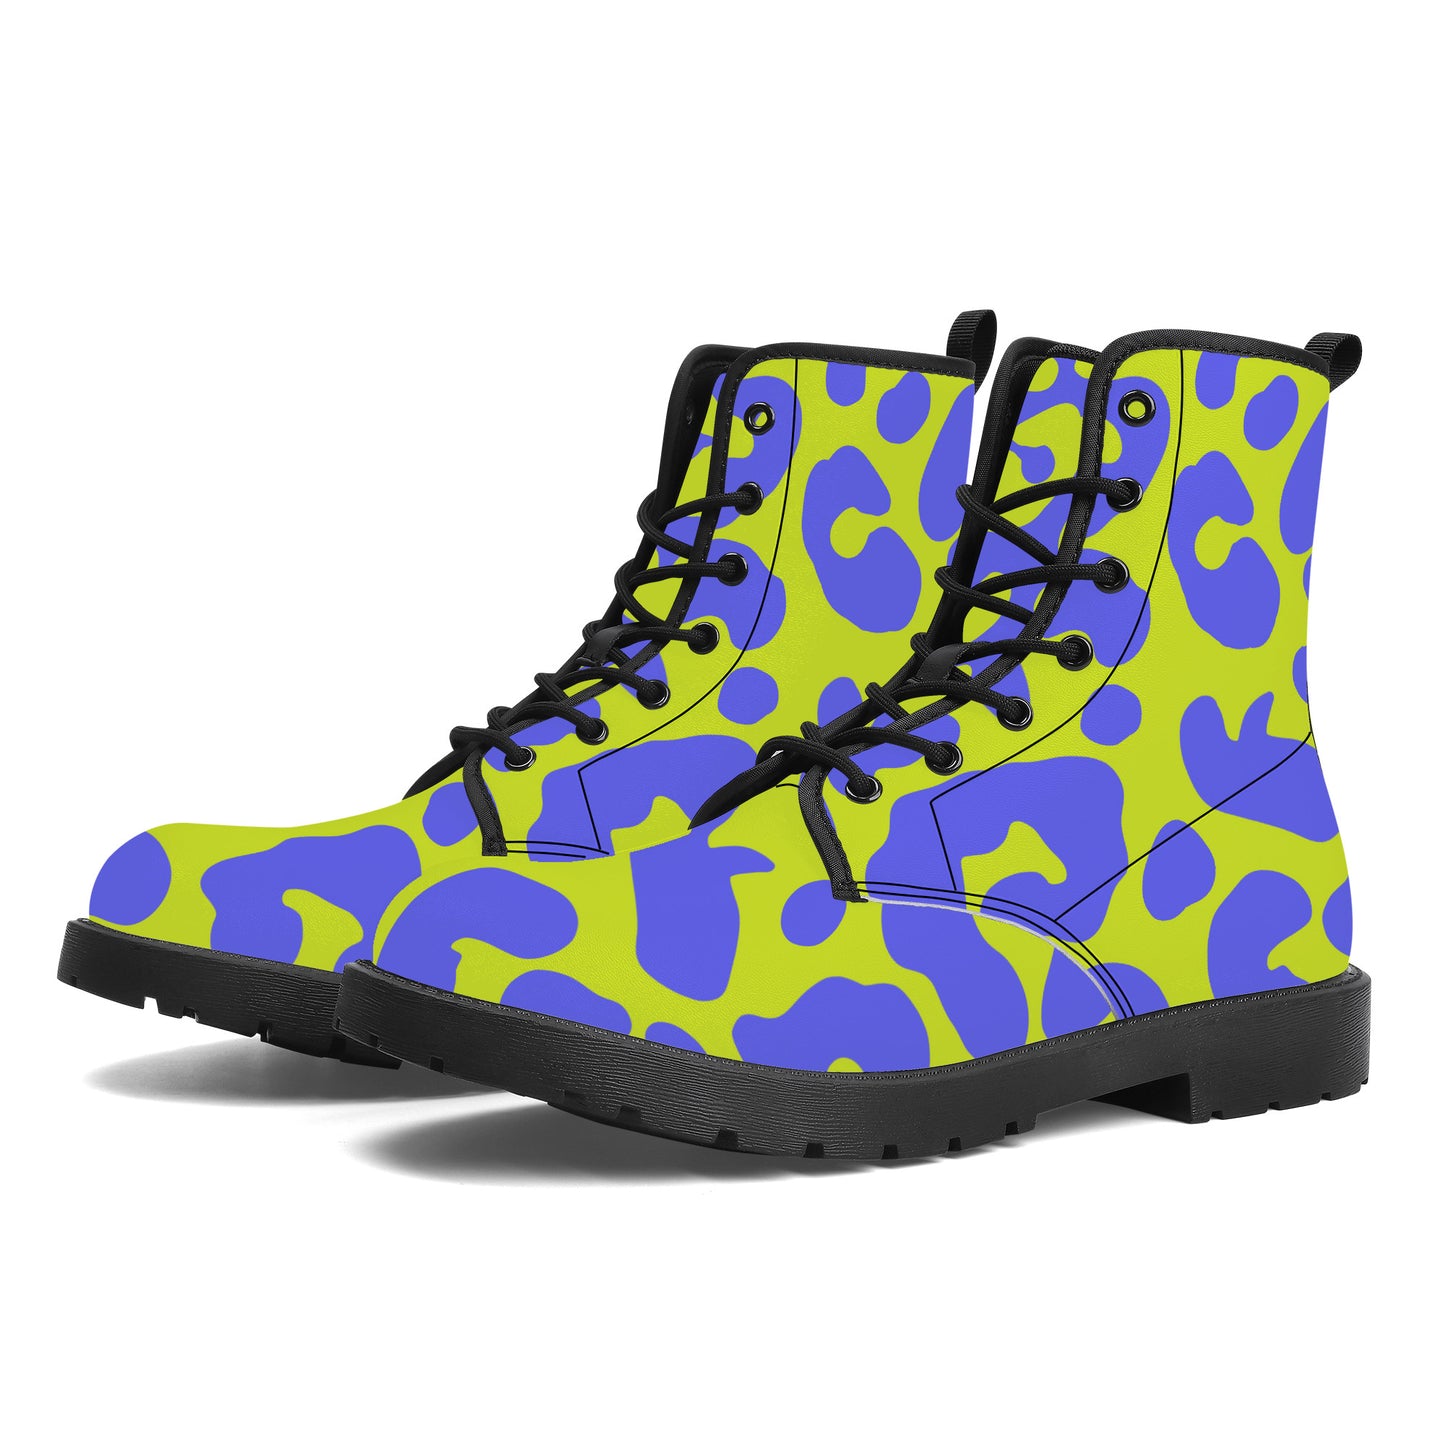 "Leopard" Eco-friendly Boots